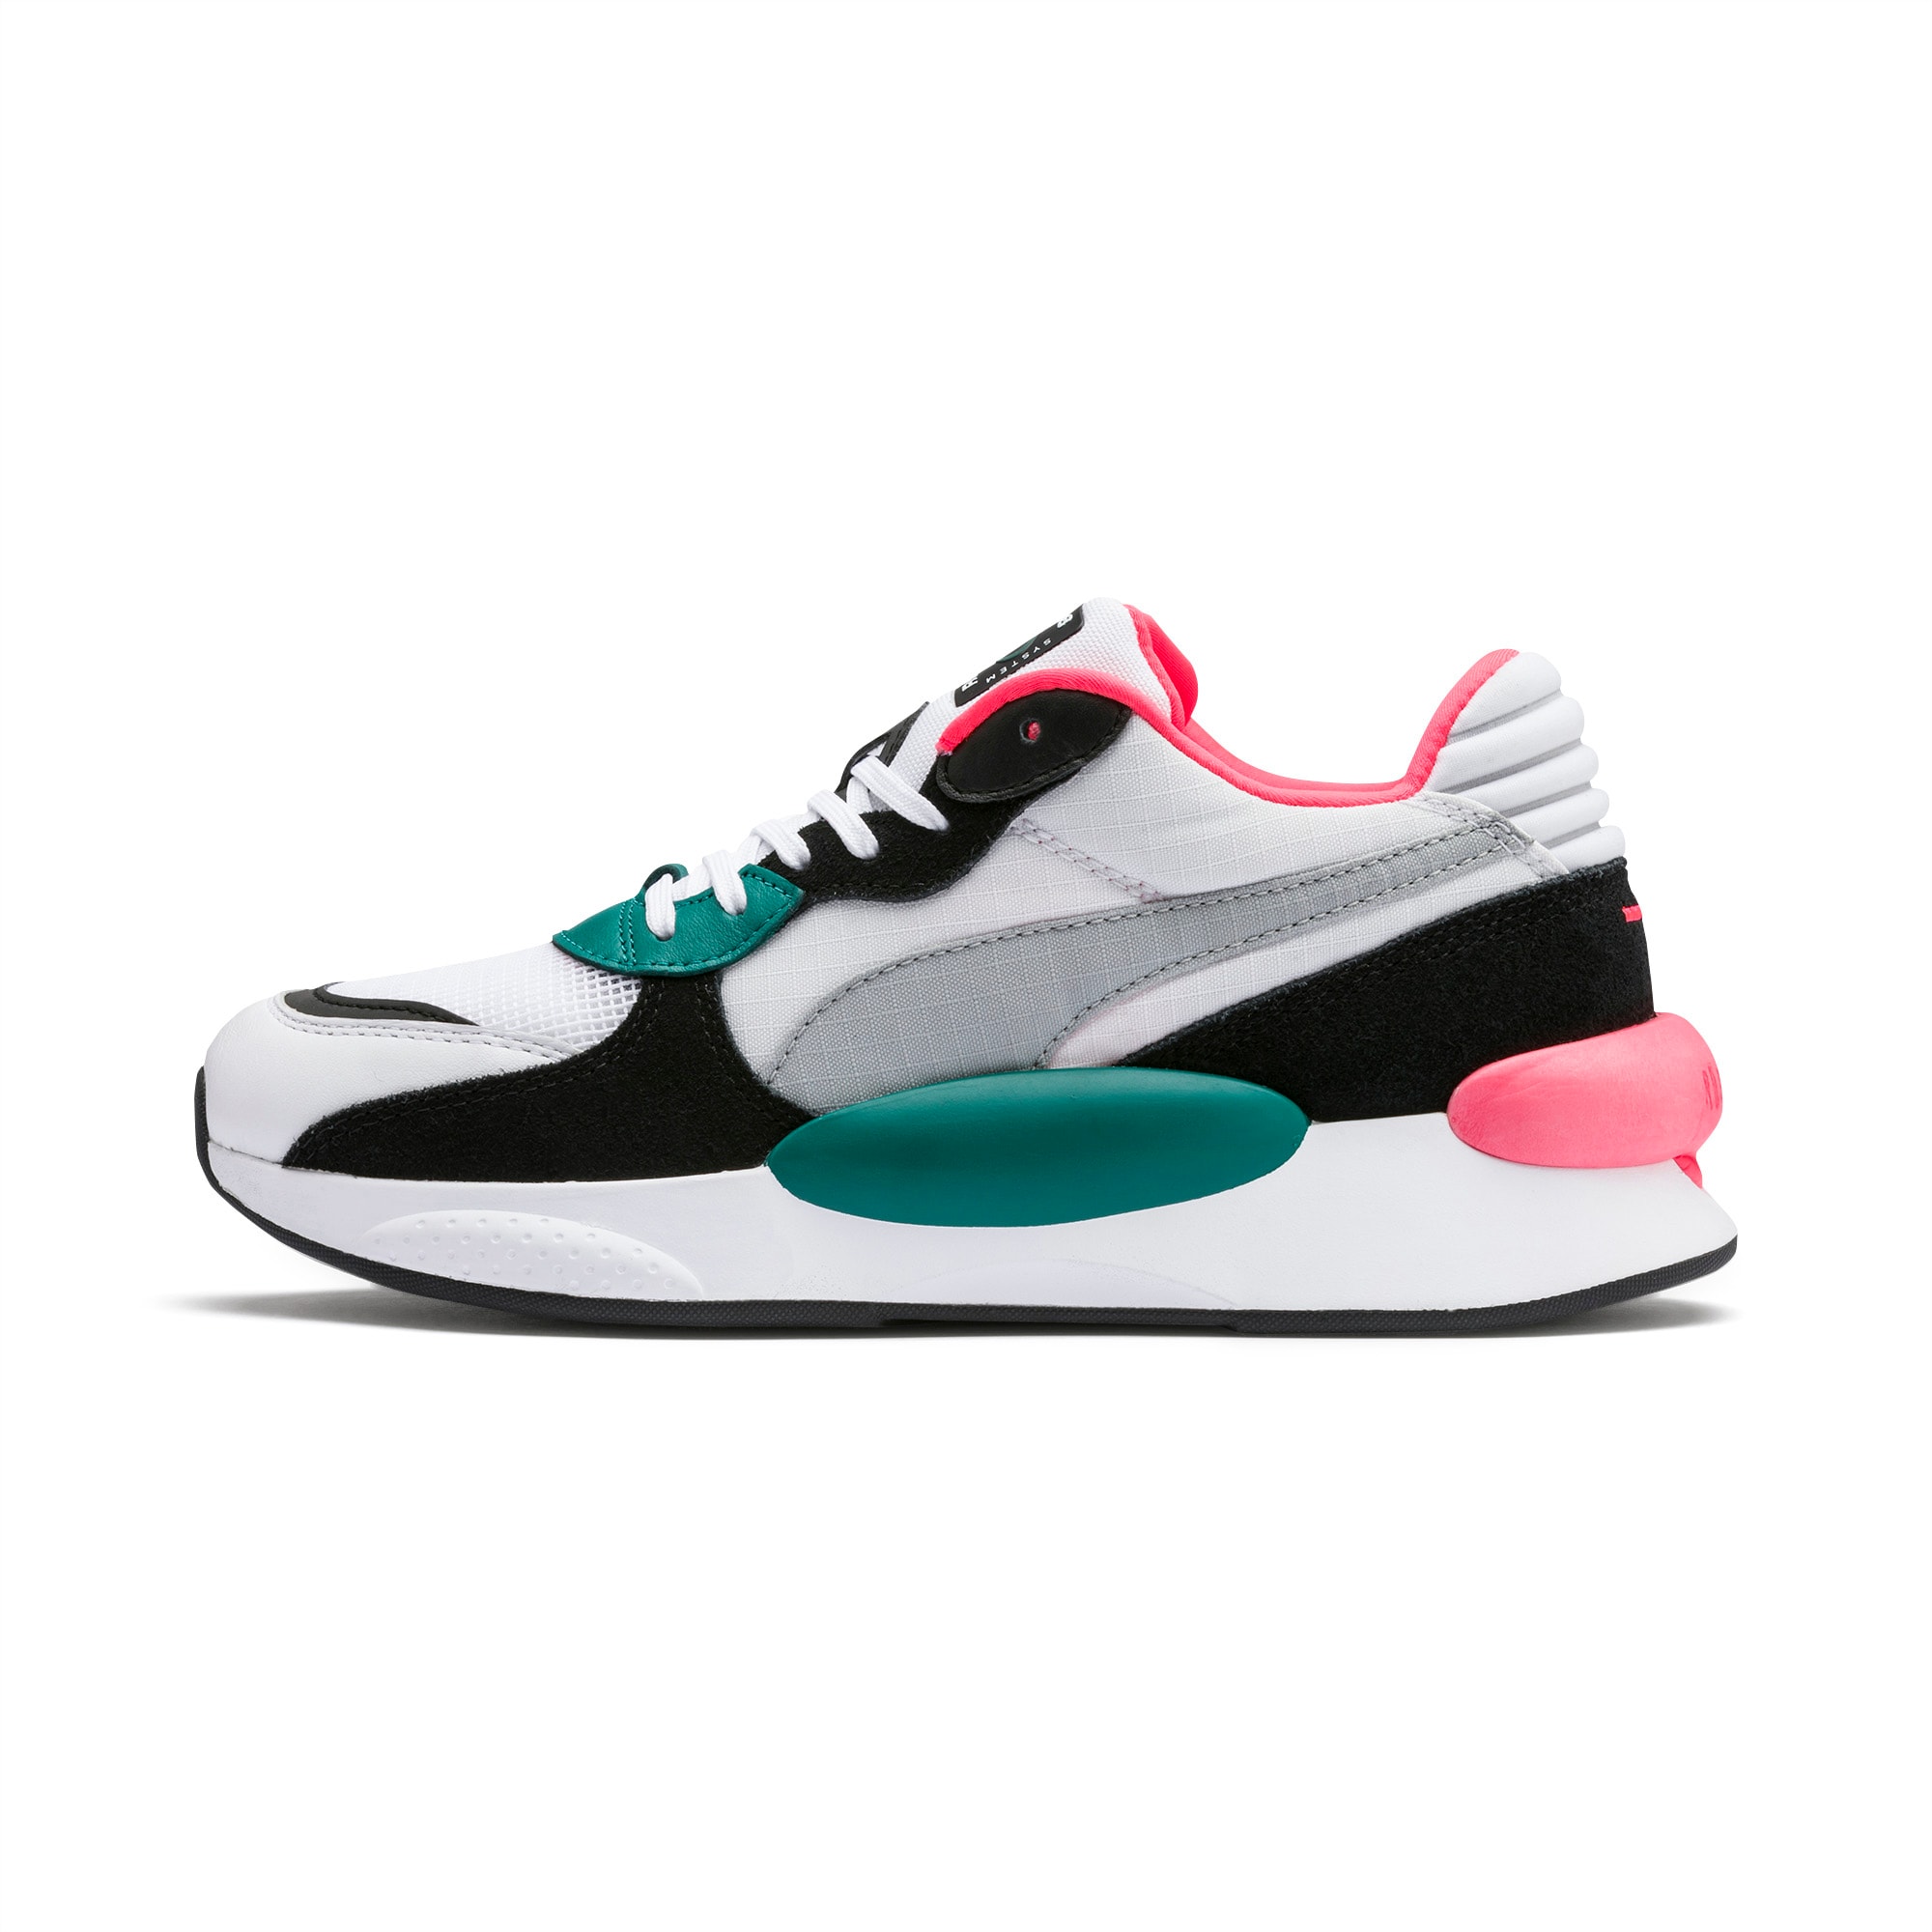 RS 9.8 Space Sneaker | PUMA RS 9.8 Collection | PUMA Deutschland